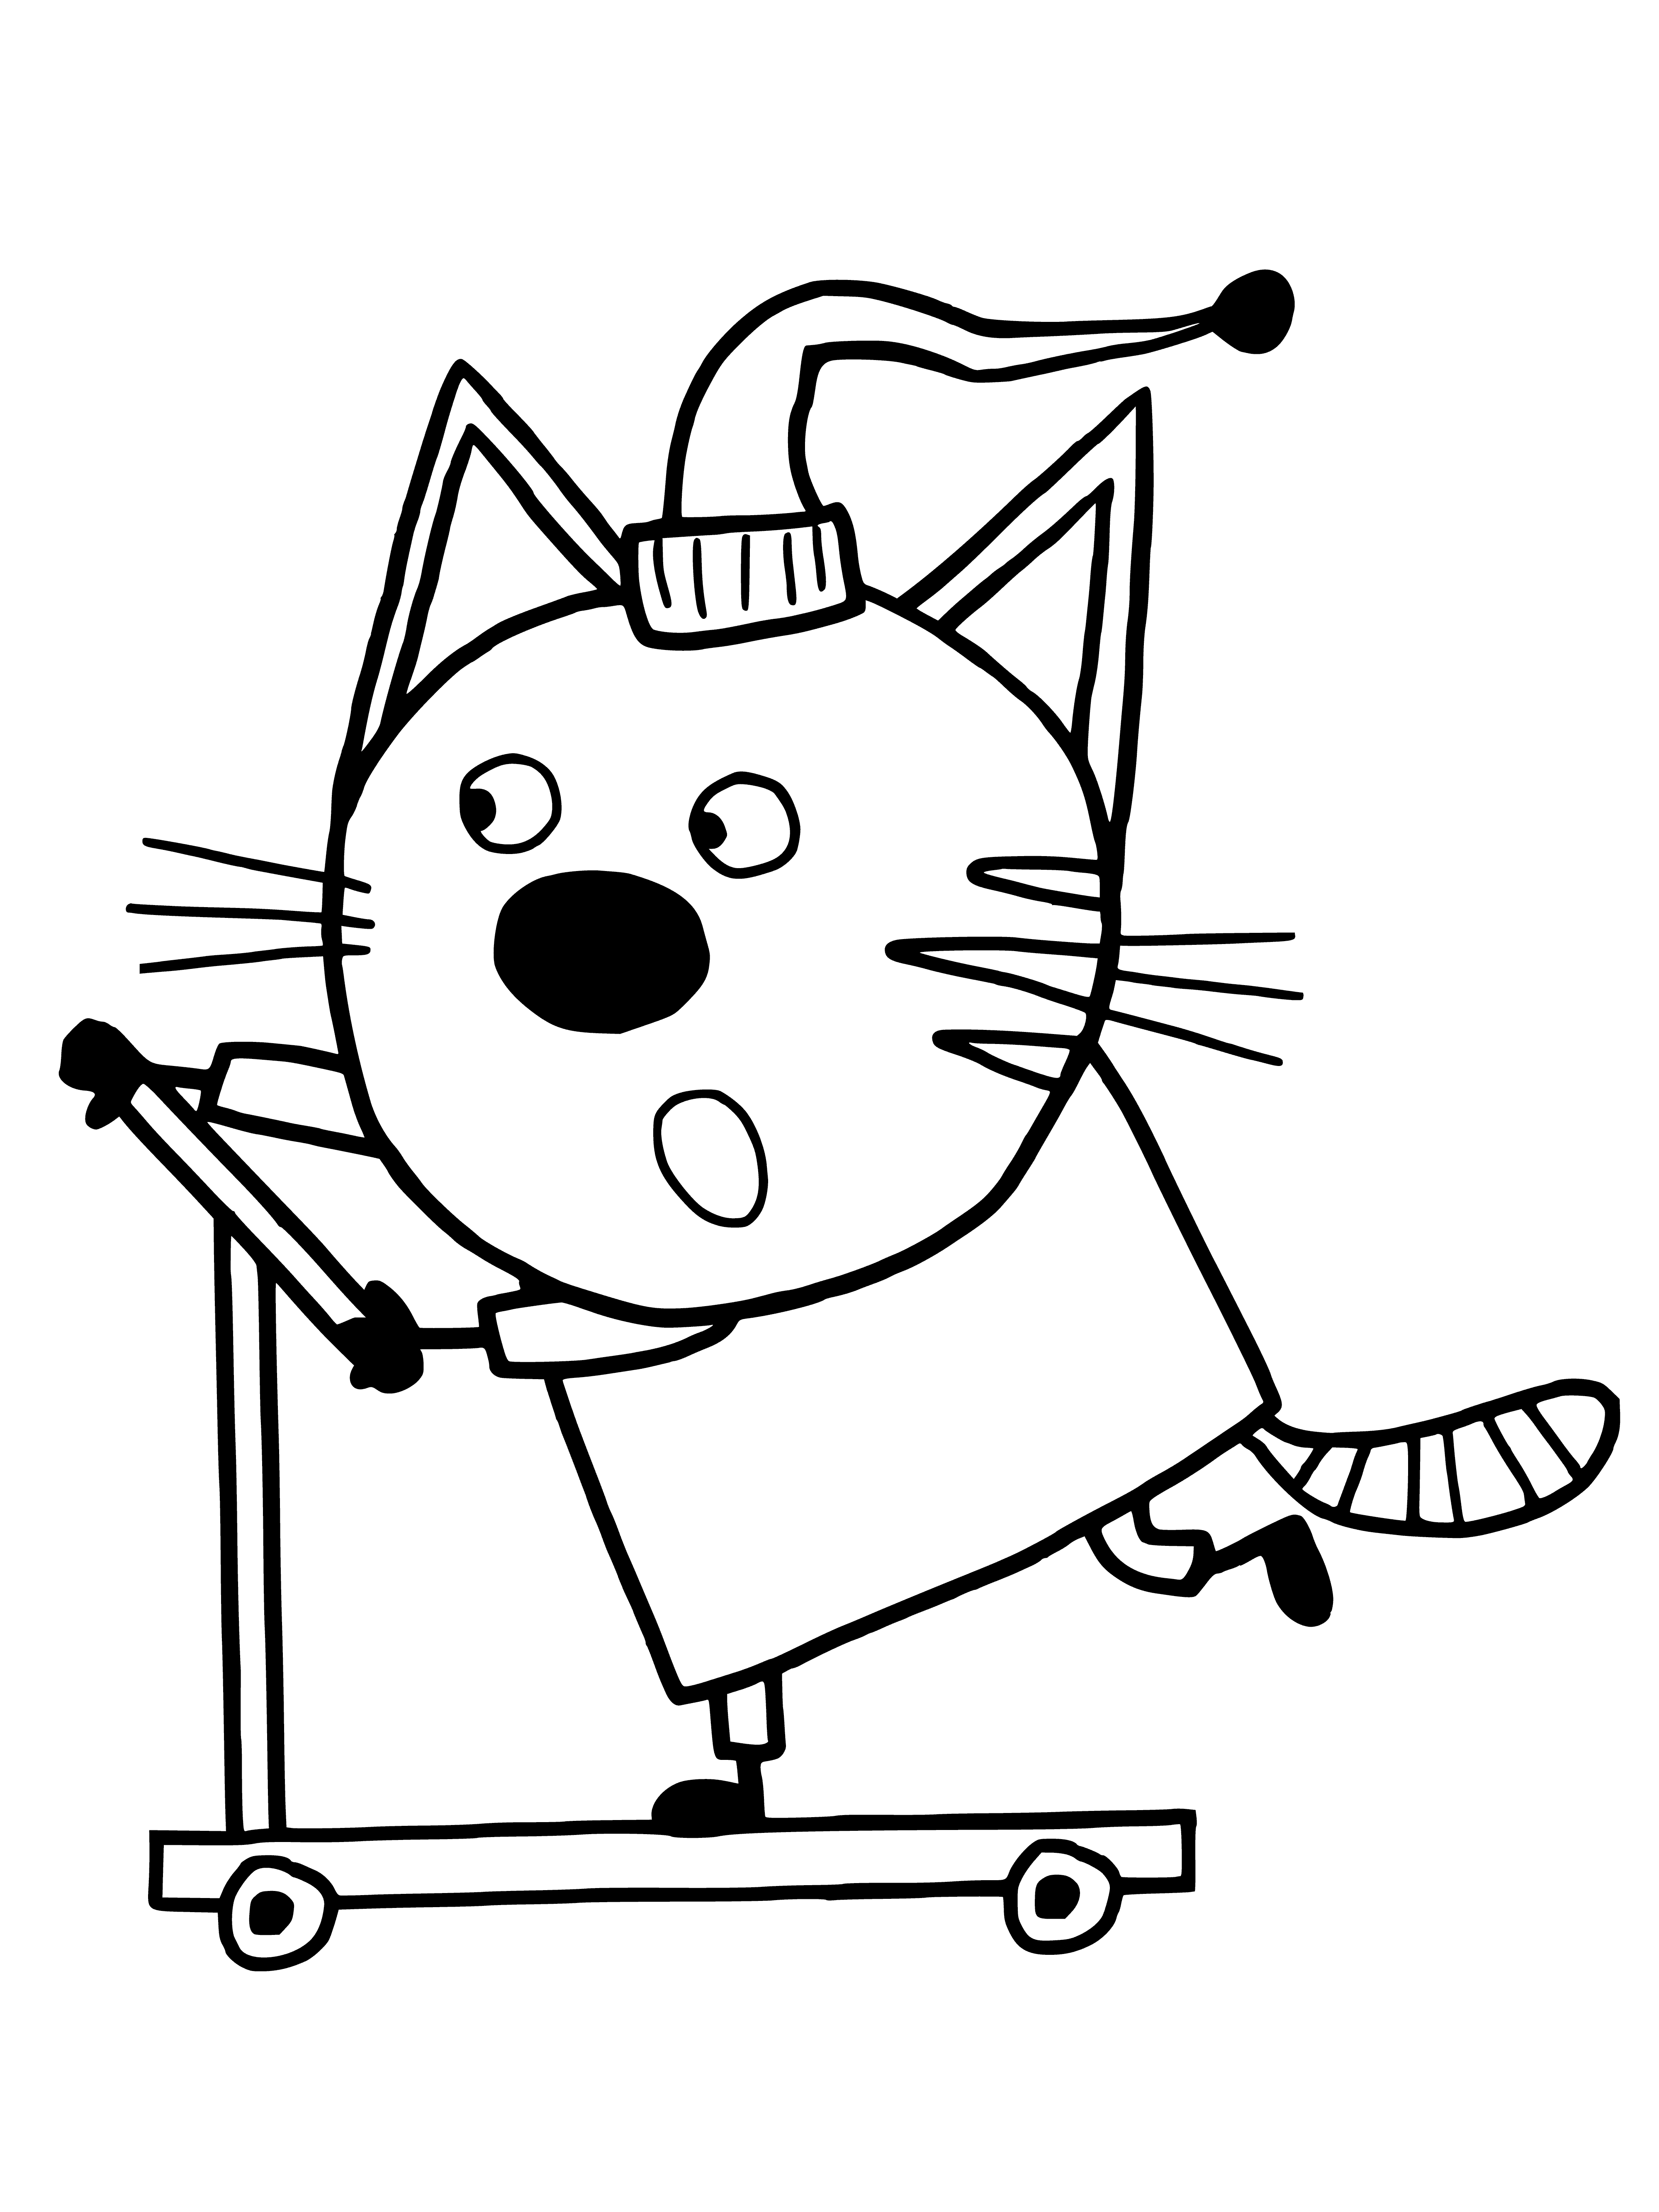 coloring page: Three Siamese cats stacked together in a pyramid-like structure, singing with eyes and mouths open. Tails and paws crossed.